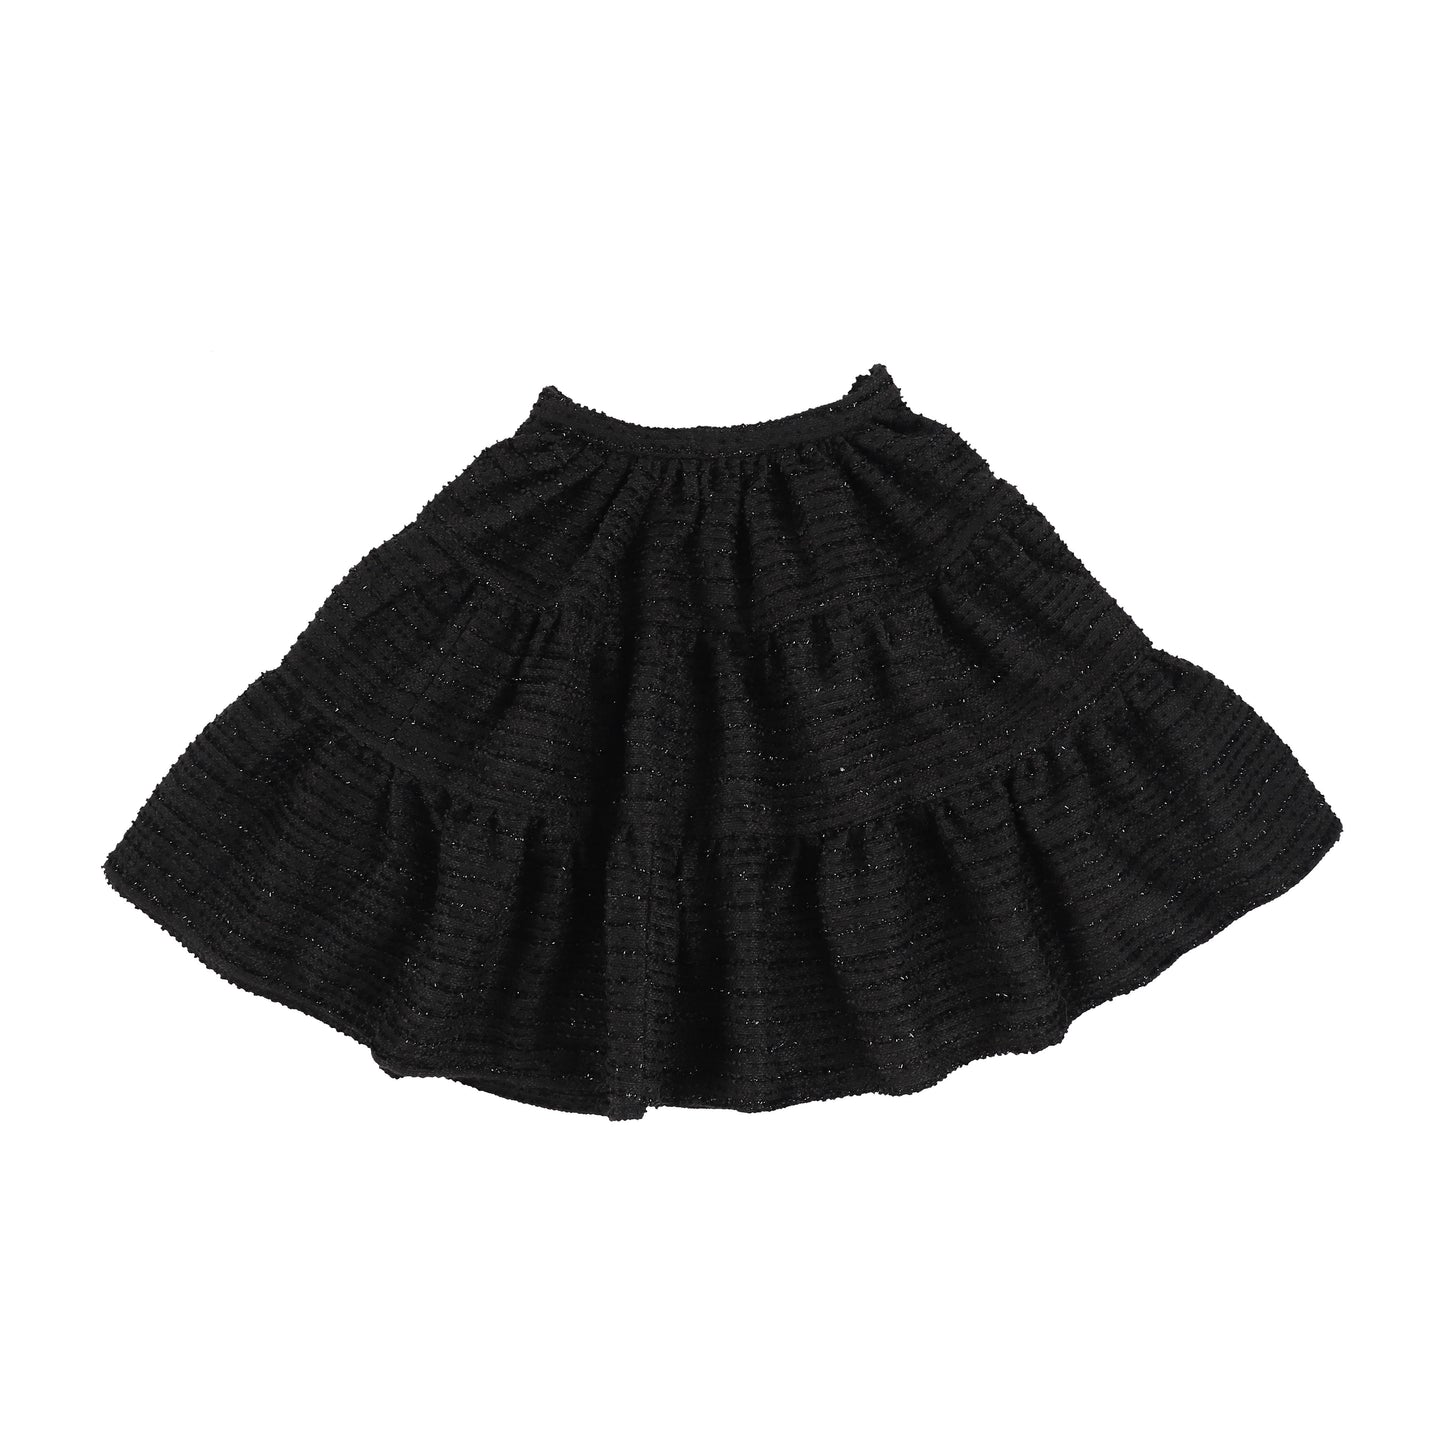 Olivia Rohde Black Sequin Striped Tiered Skirt [Final Sale]